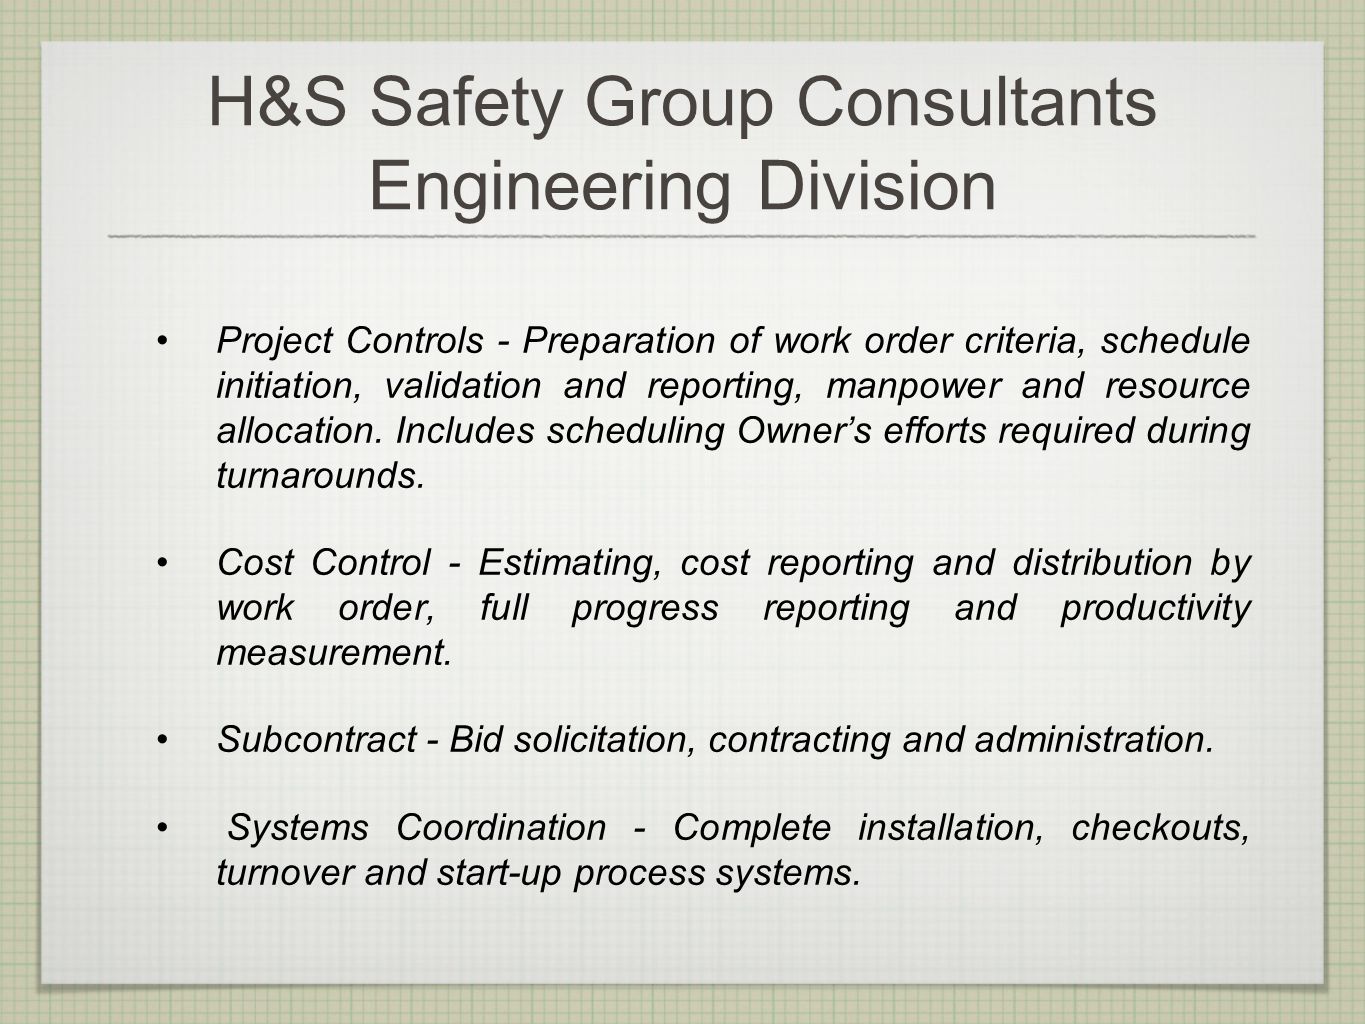 H&S Safety Group Consultants Engineering Division Project Controls - Preparation of work order criteria, schedule initiation, validation and reporting, manpower and resource allocation.